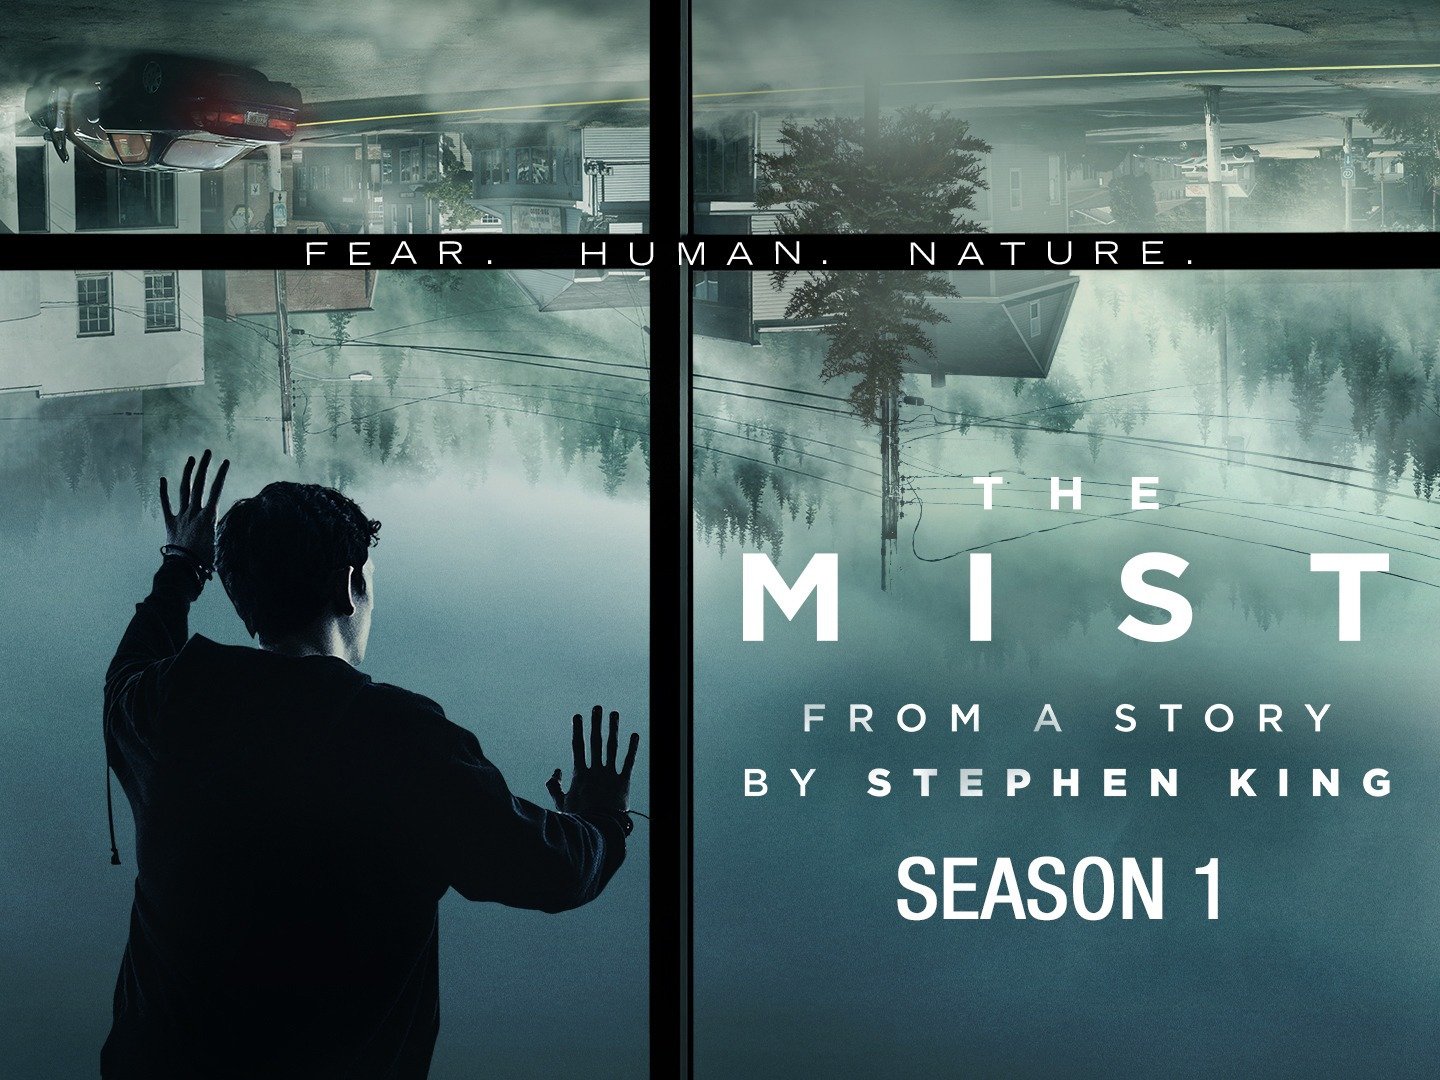 The New Trailer for The Mist Has Arrived